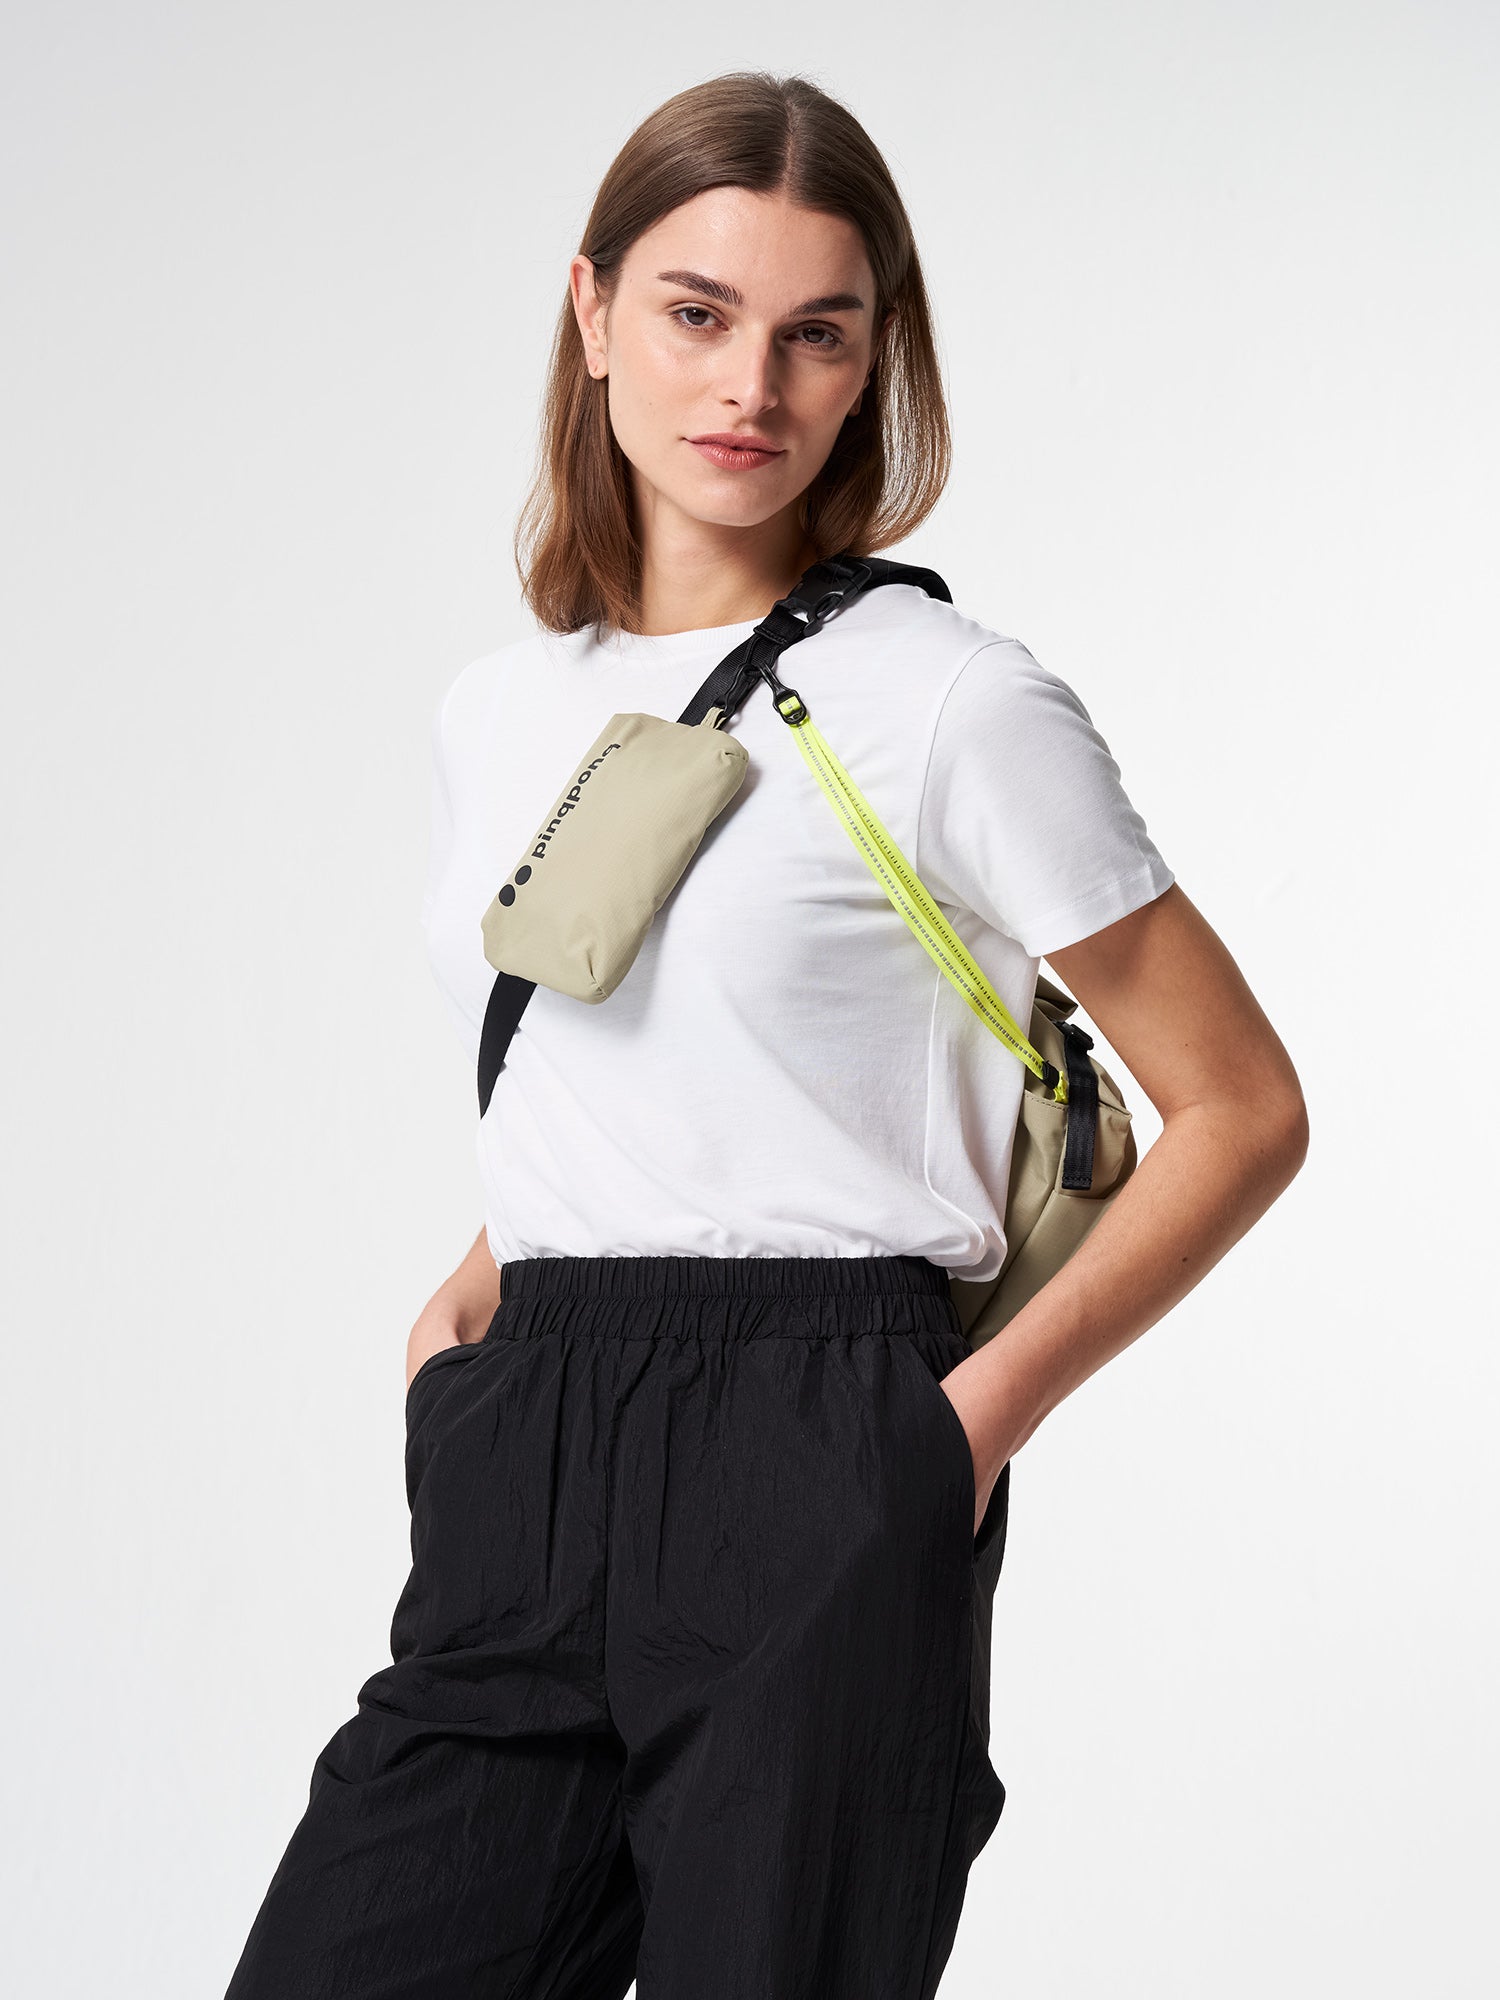 Aksel Hip Bag: Versatile, durable, and sustainable ✓ – pinqponq